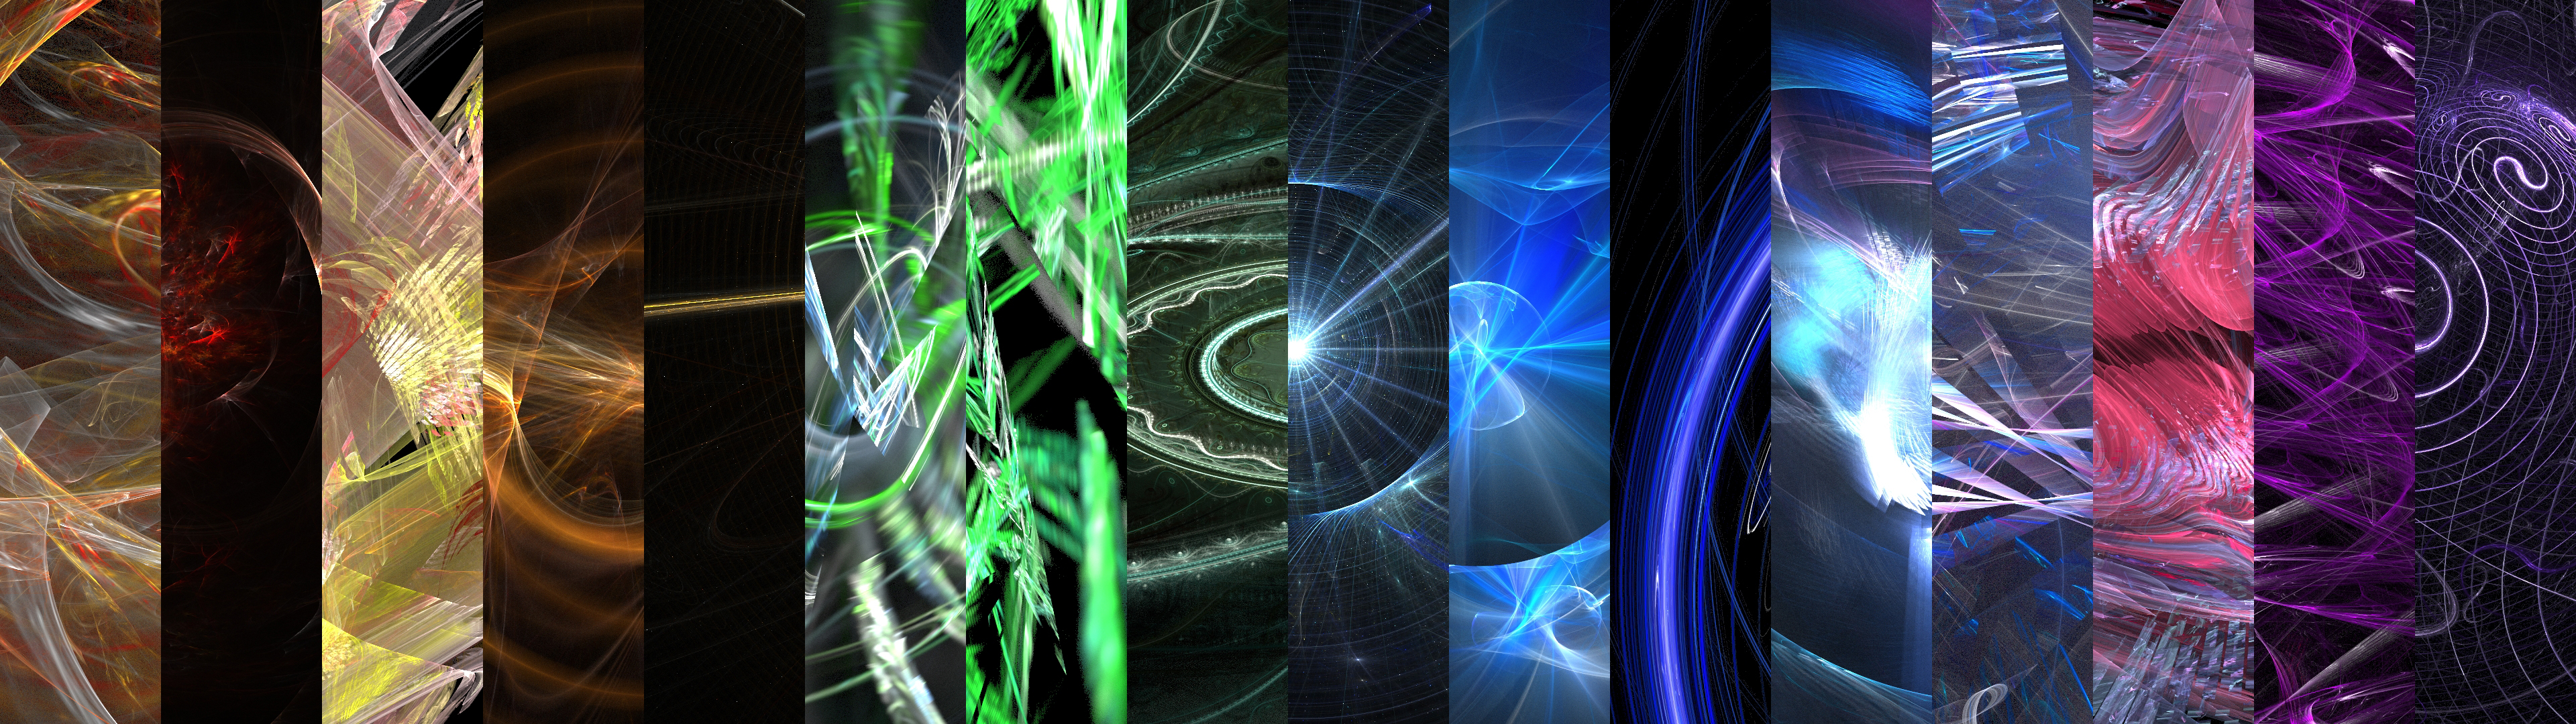 bigbcdeviantartcomDual monitor wallpaper pack by